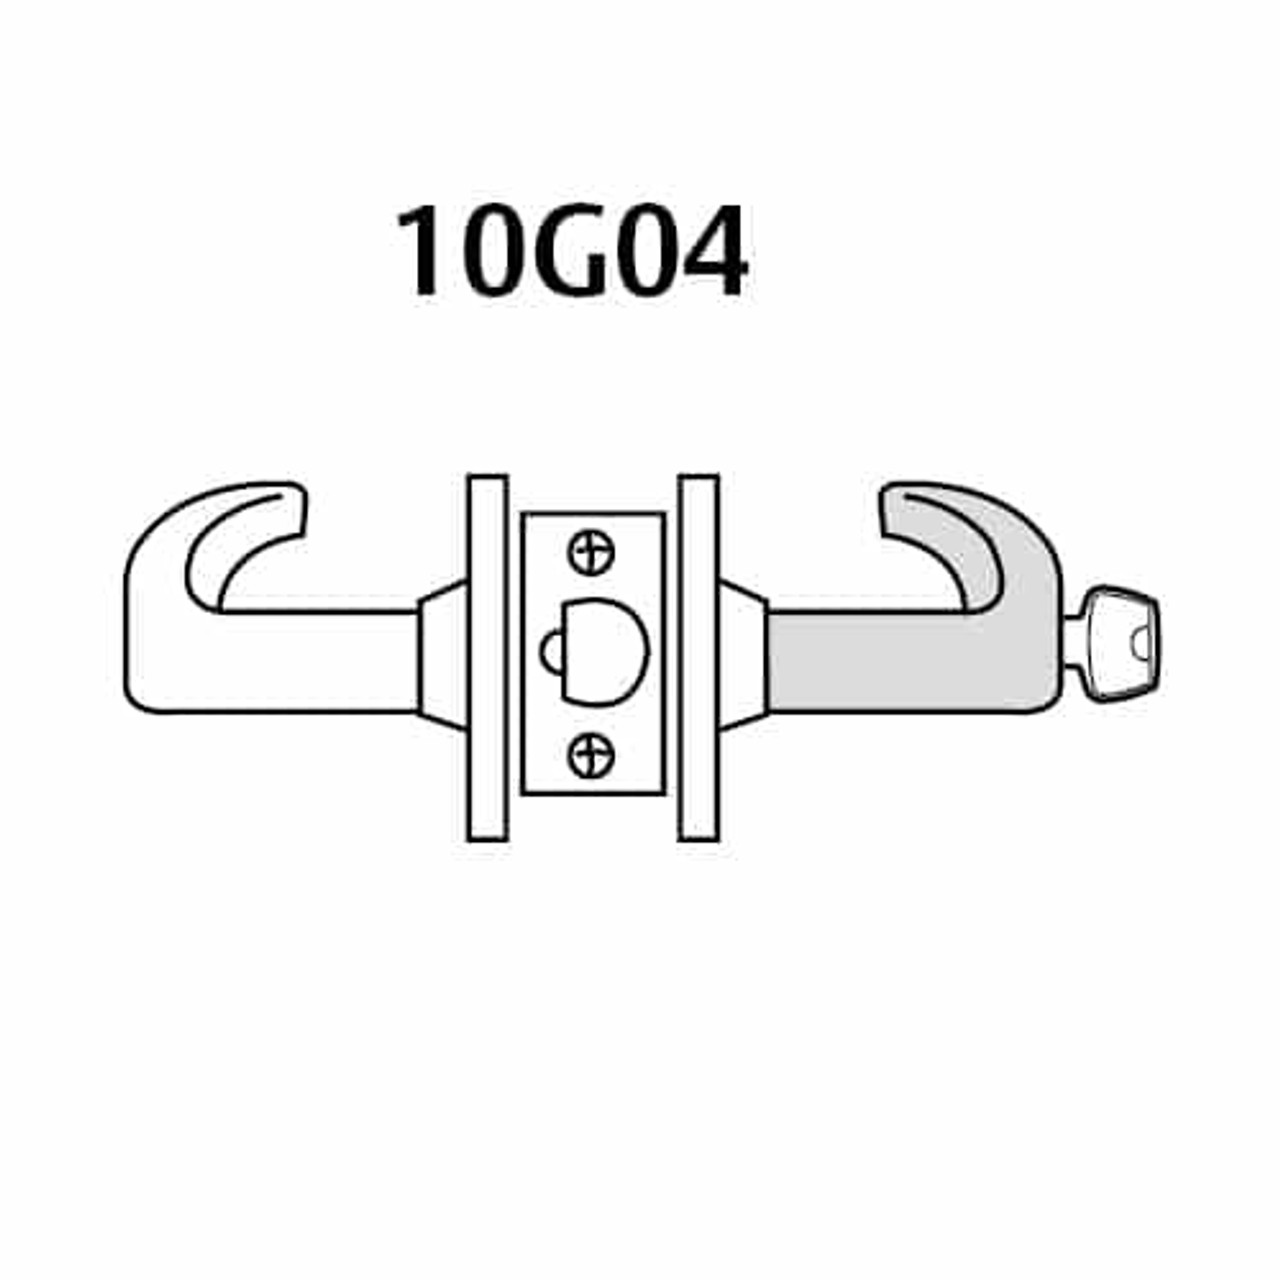 2870-10G04-LB-26 Sargent 10 Line Cylindrical Storeroom/Closet Locks with B Lever Design and L Rose Prepped for SFIC in Bright Chrome